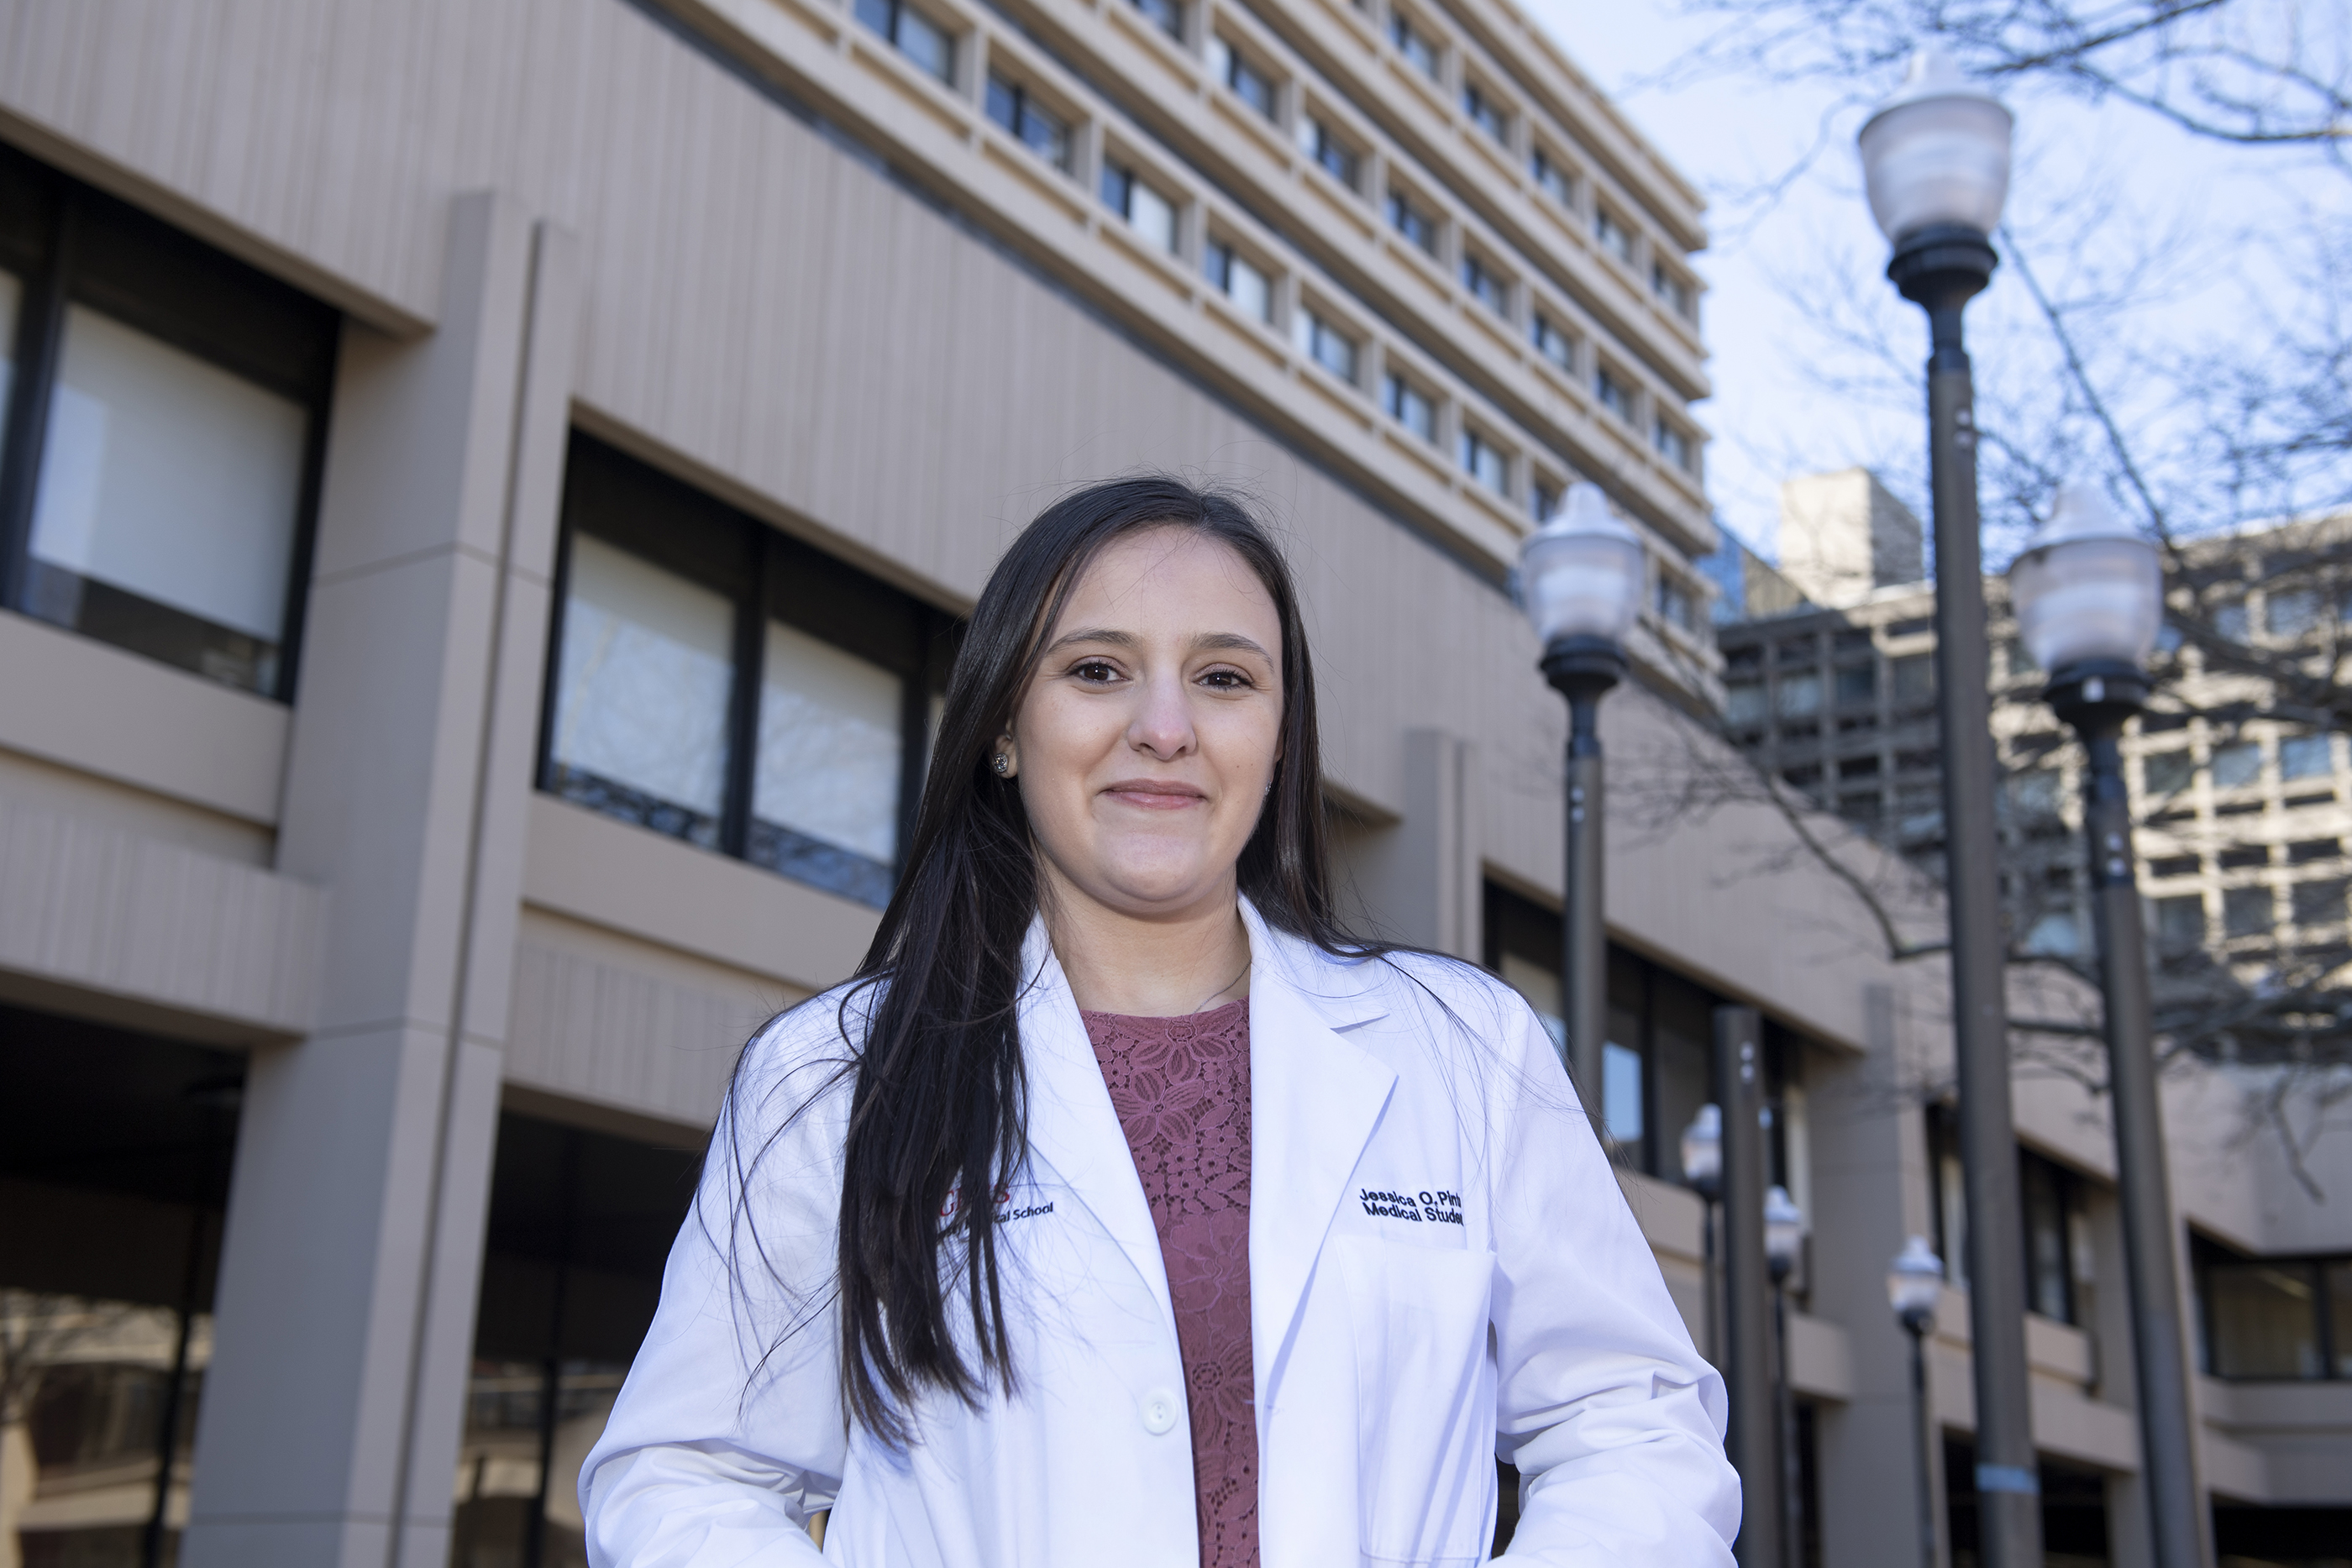 Match Day 2021: During a Journey Marked by Family Tragedy, Med Student  Persevered | Rutgers University